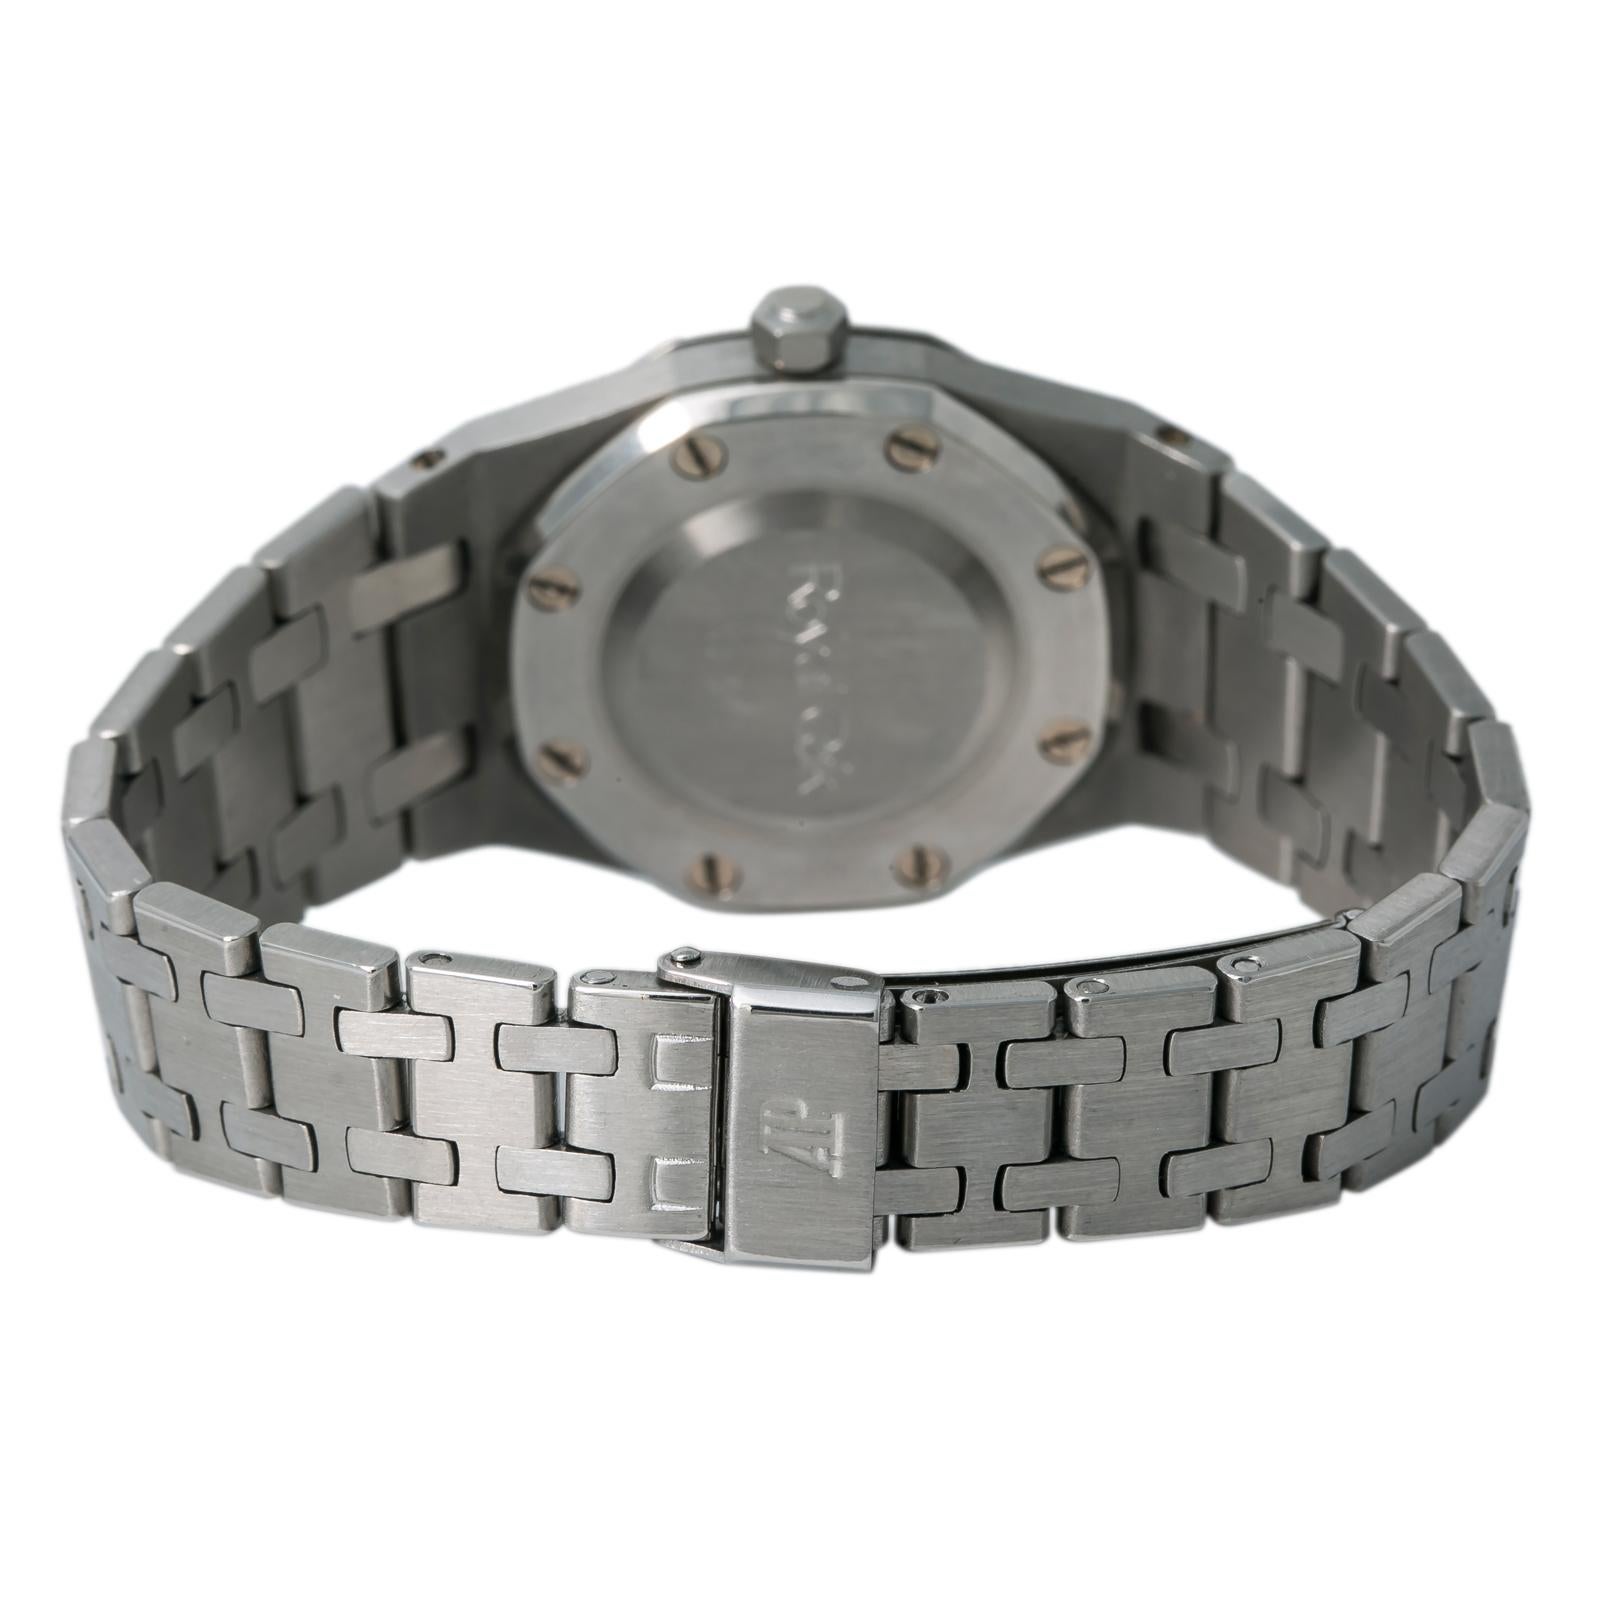 Audemars Piguet Royal Oak 8638ST Women's Automatic Watch Stainless Steel In Good Condition For Sale In Miami, FL